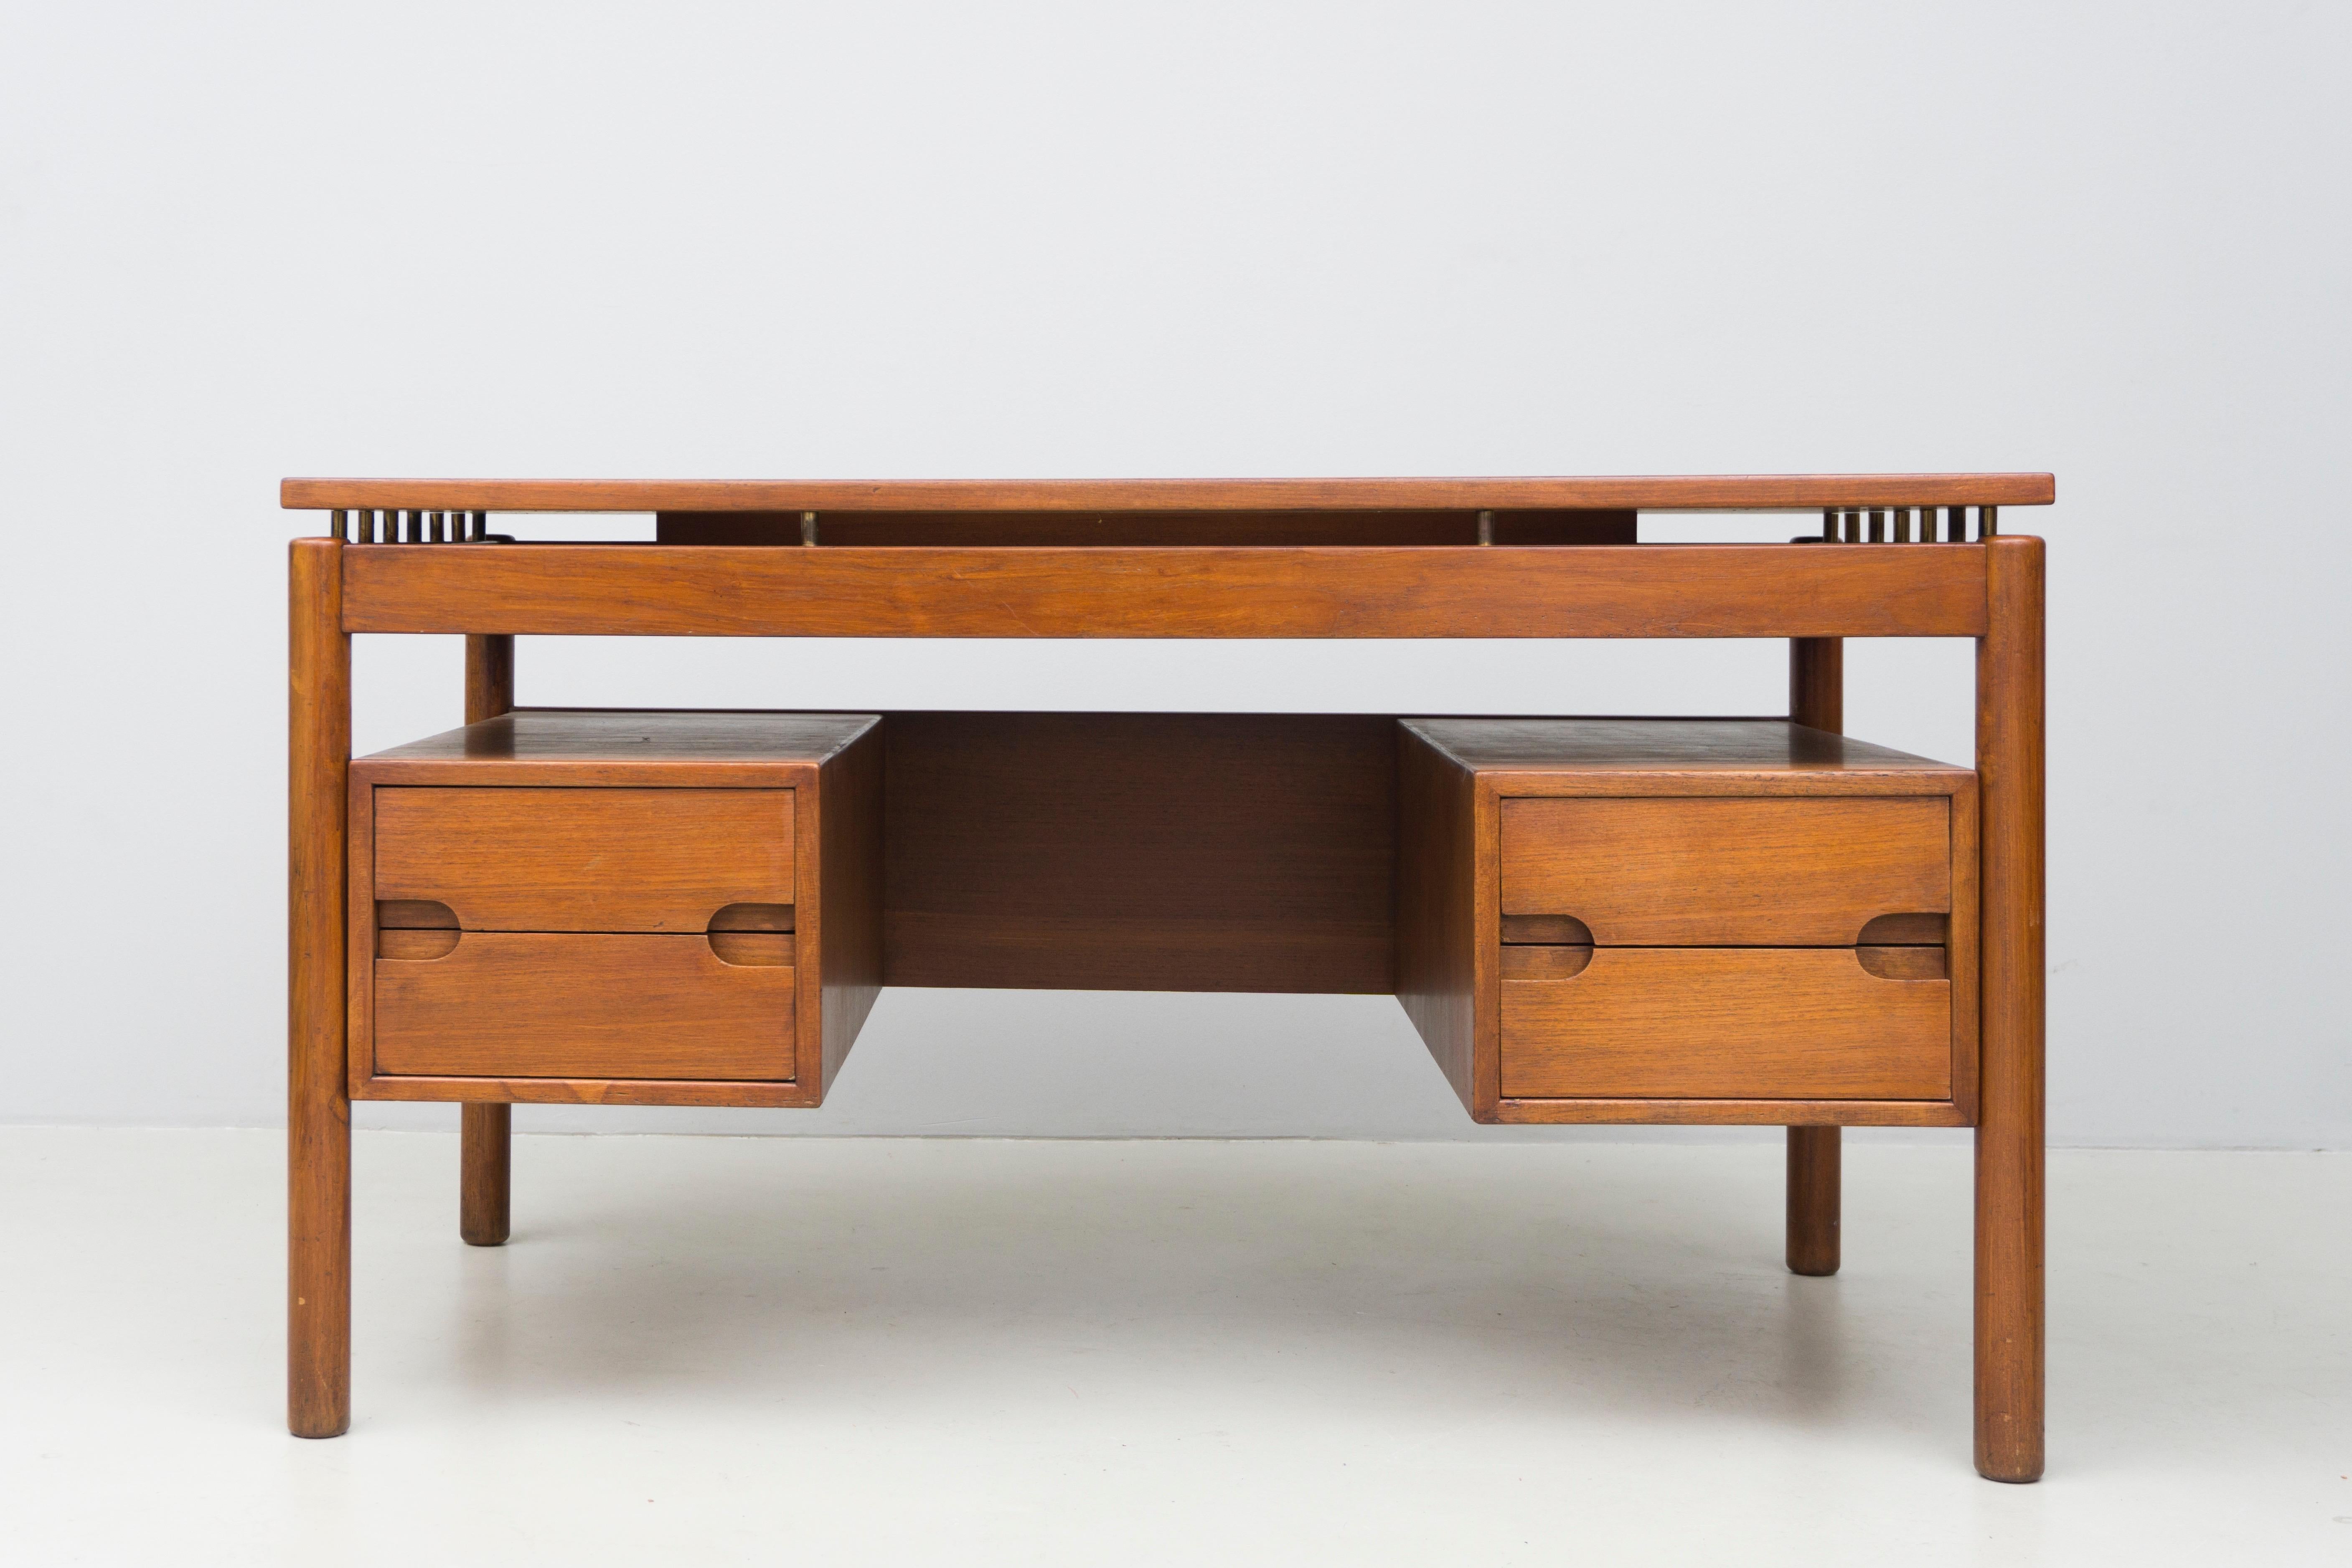 Wooden desk made by finish designer Ilmari Tapiovaara, made of solid teak wood with drawers and brass details.
Labeled 'La Permanente di Cantú'

Ilmari Tapiovaara (1914-1999) graduated in interior design and worked for Asko. He would count Alvar